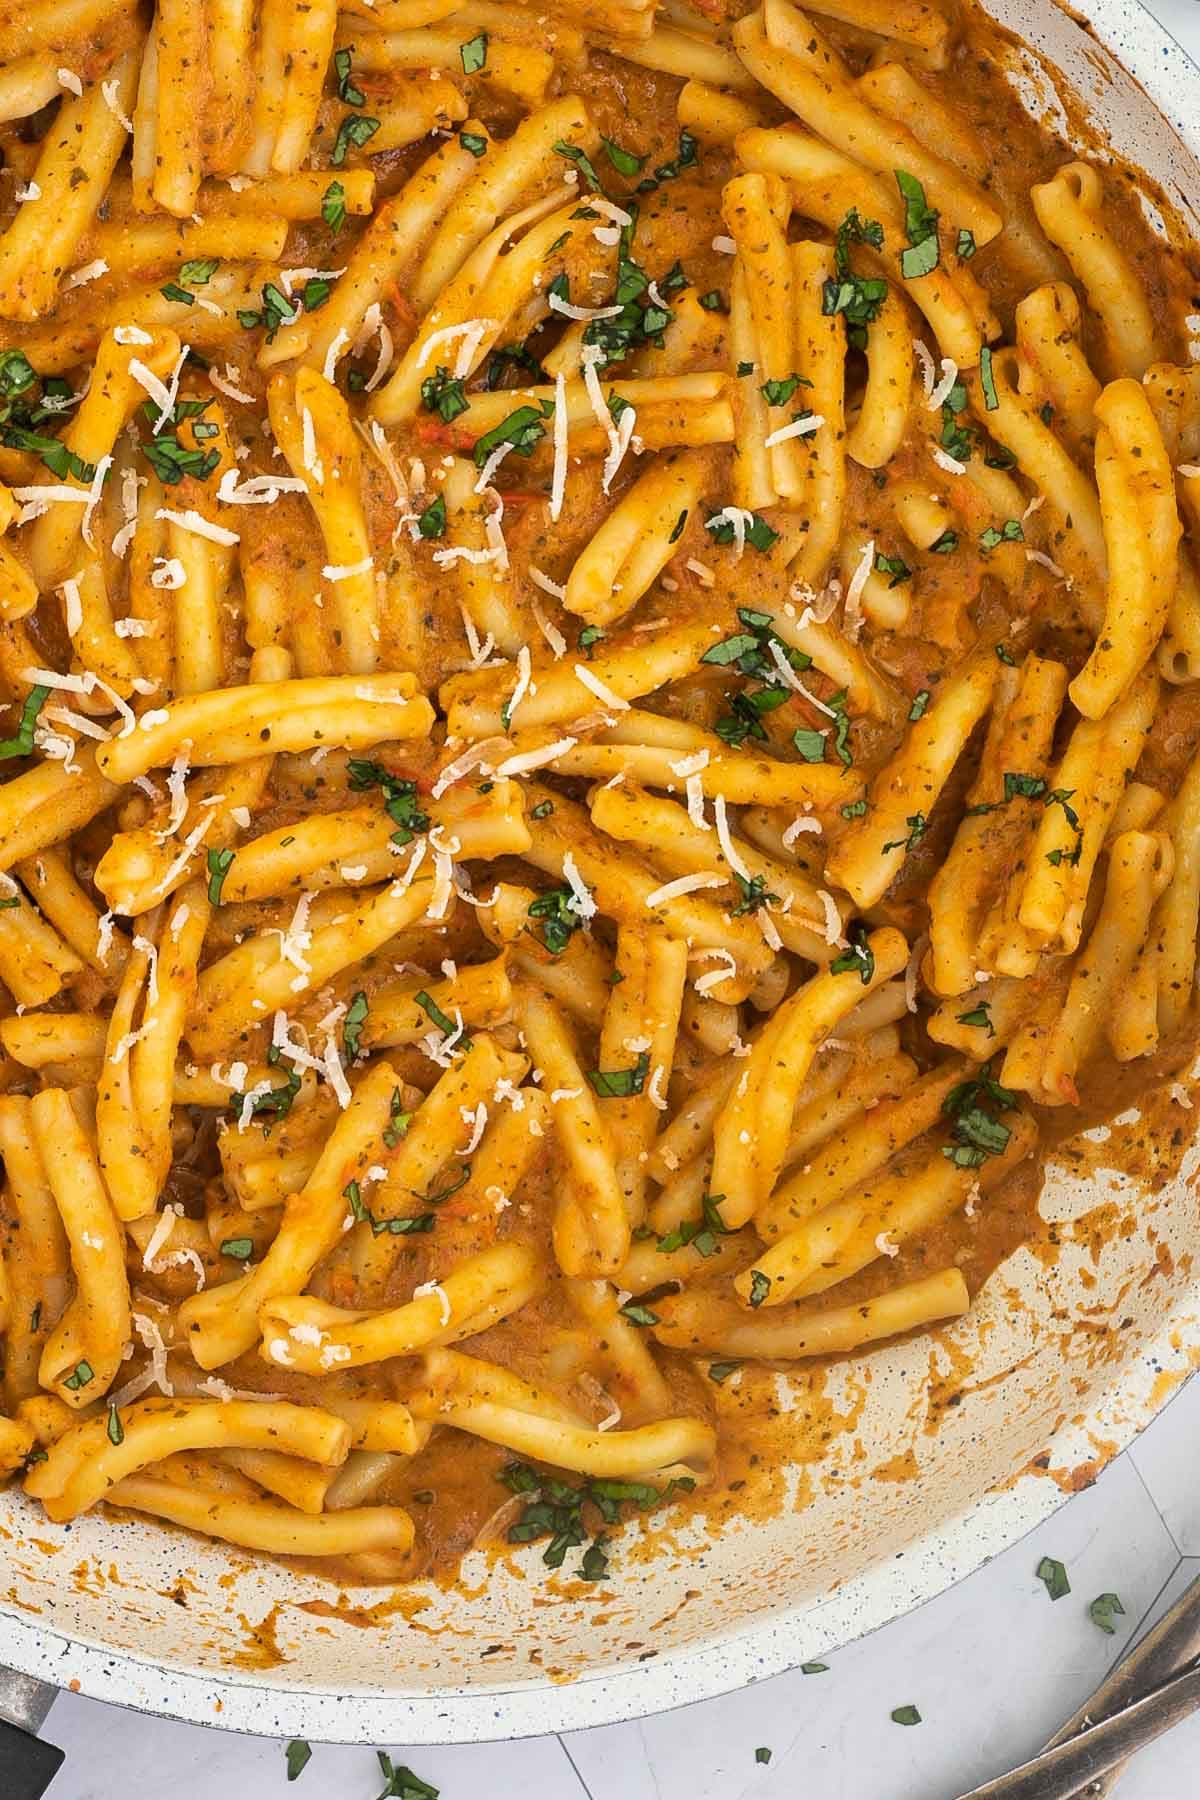 A white frying pan with twisted short pasta in a creamy orange sauce topped with grated cheese and chopped green herbs.